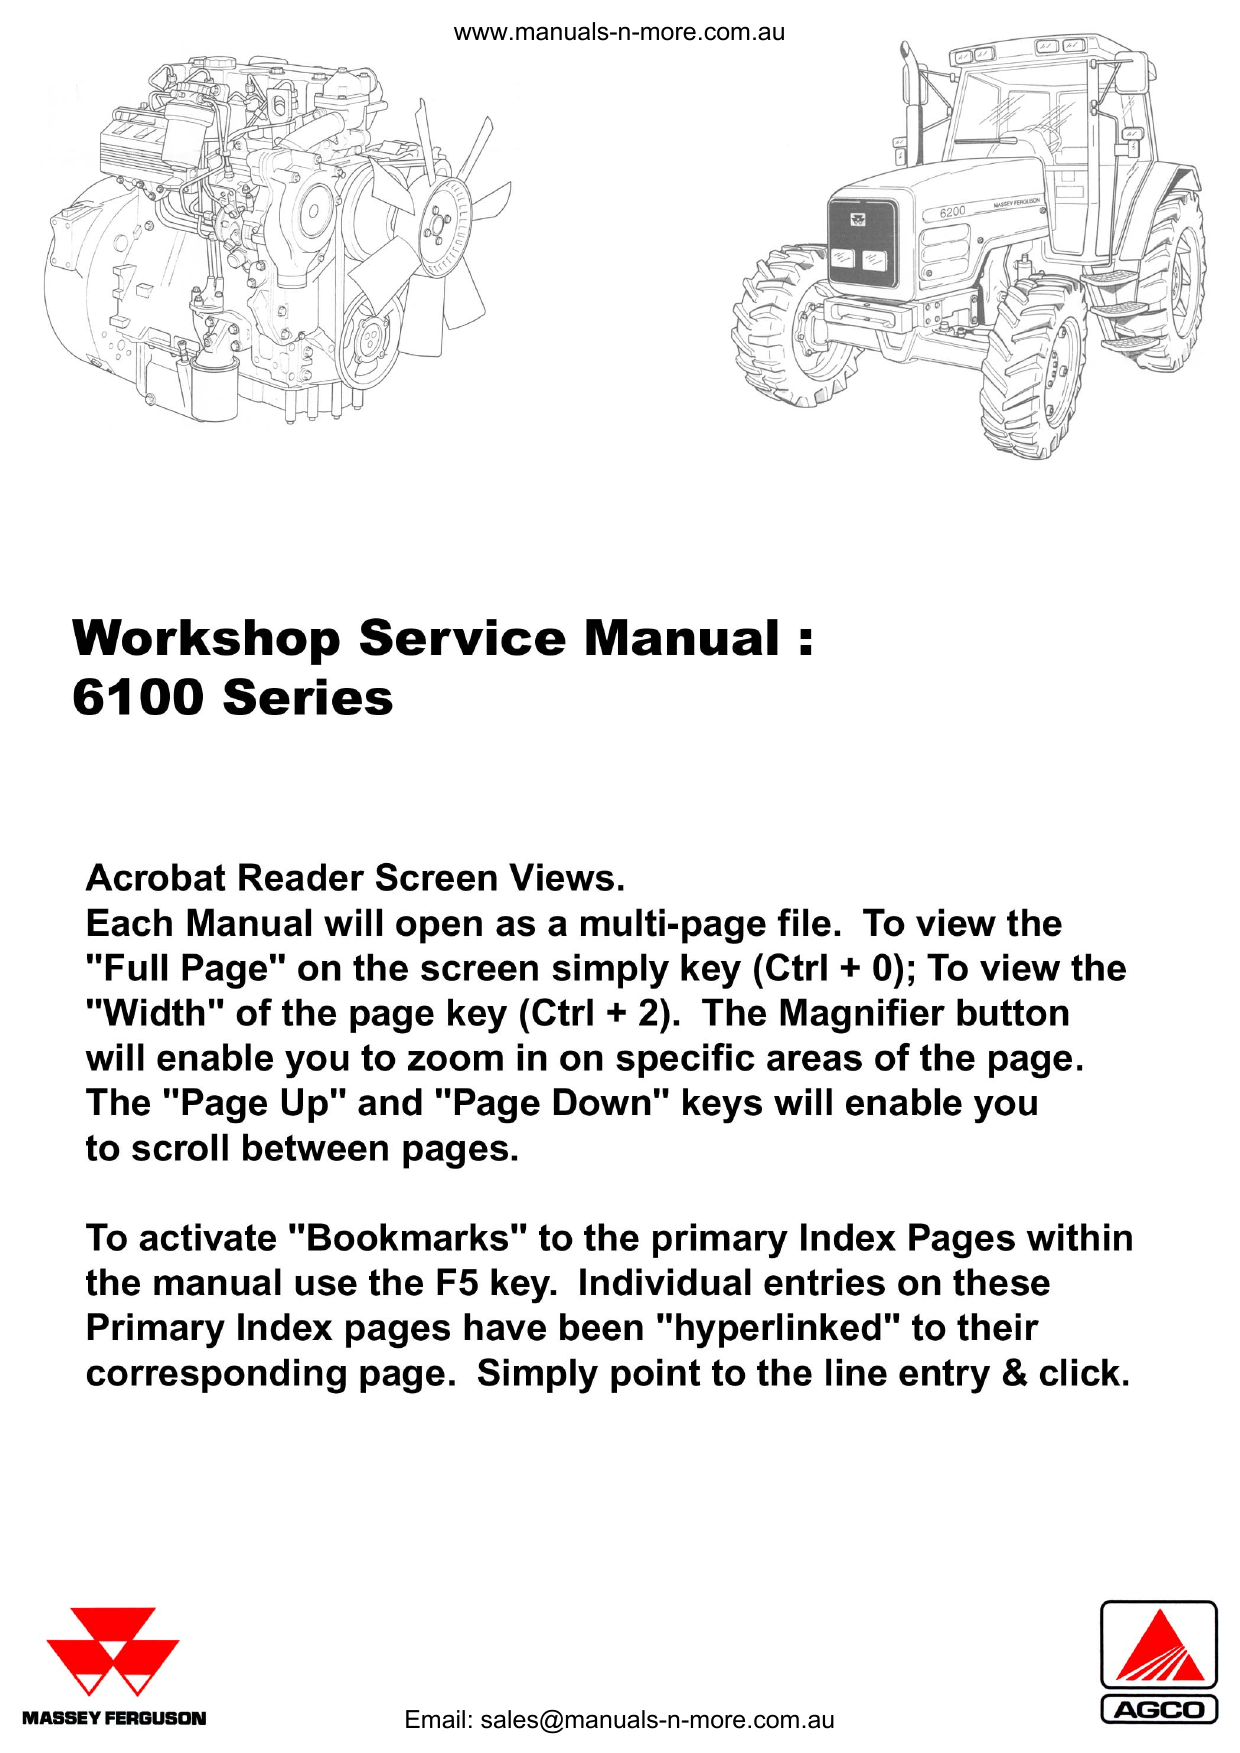 Massey Ferguson 6120, 6130, 6140, 6150, 6160, 6170, 6180, 6190 utility tractor workshop service manual Preview image 2